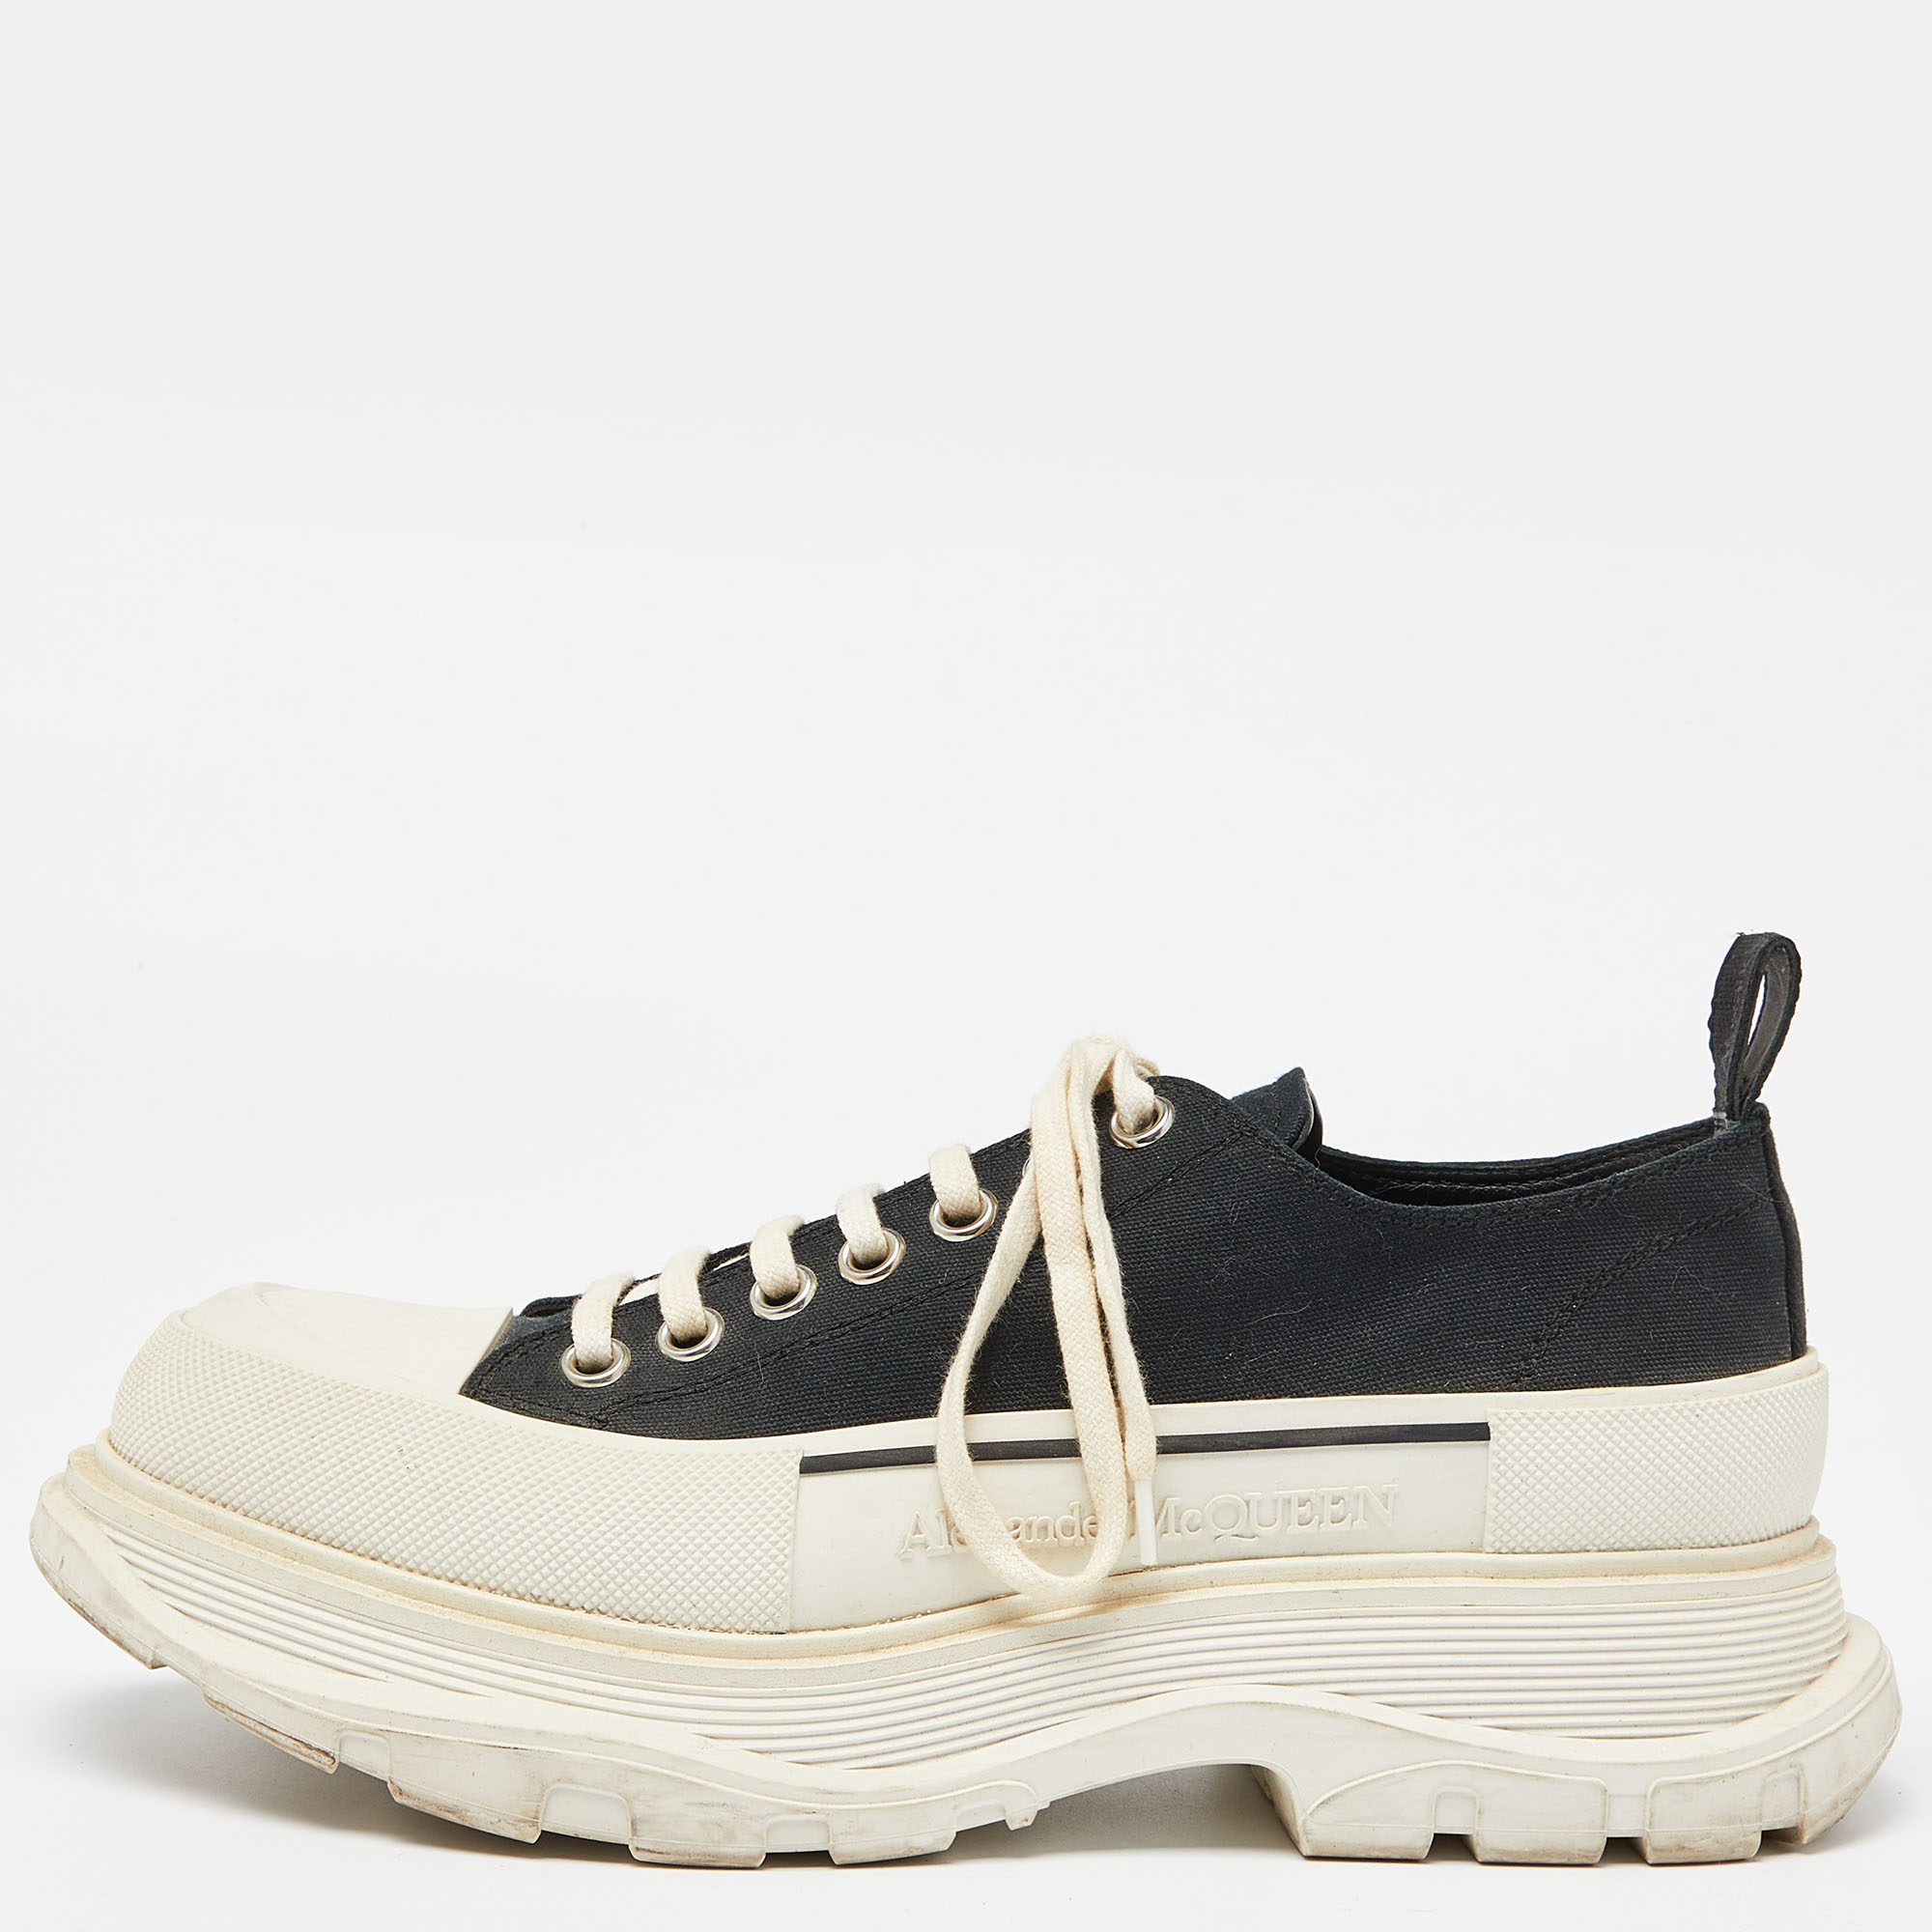 

Alexander McQueen Black Canvas and Rubber Tread Slick Lace Up Sneakers